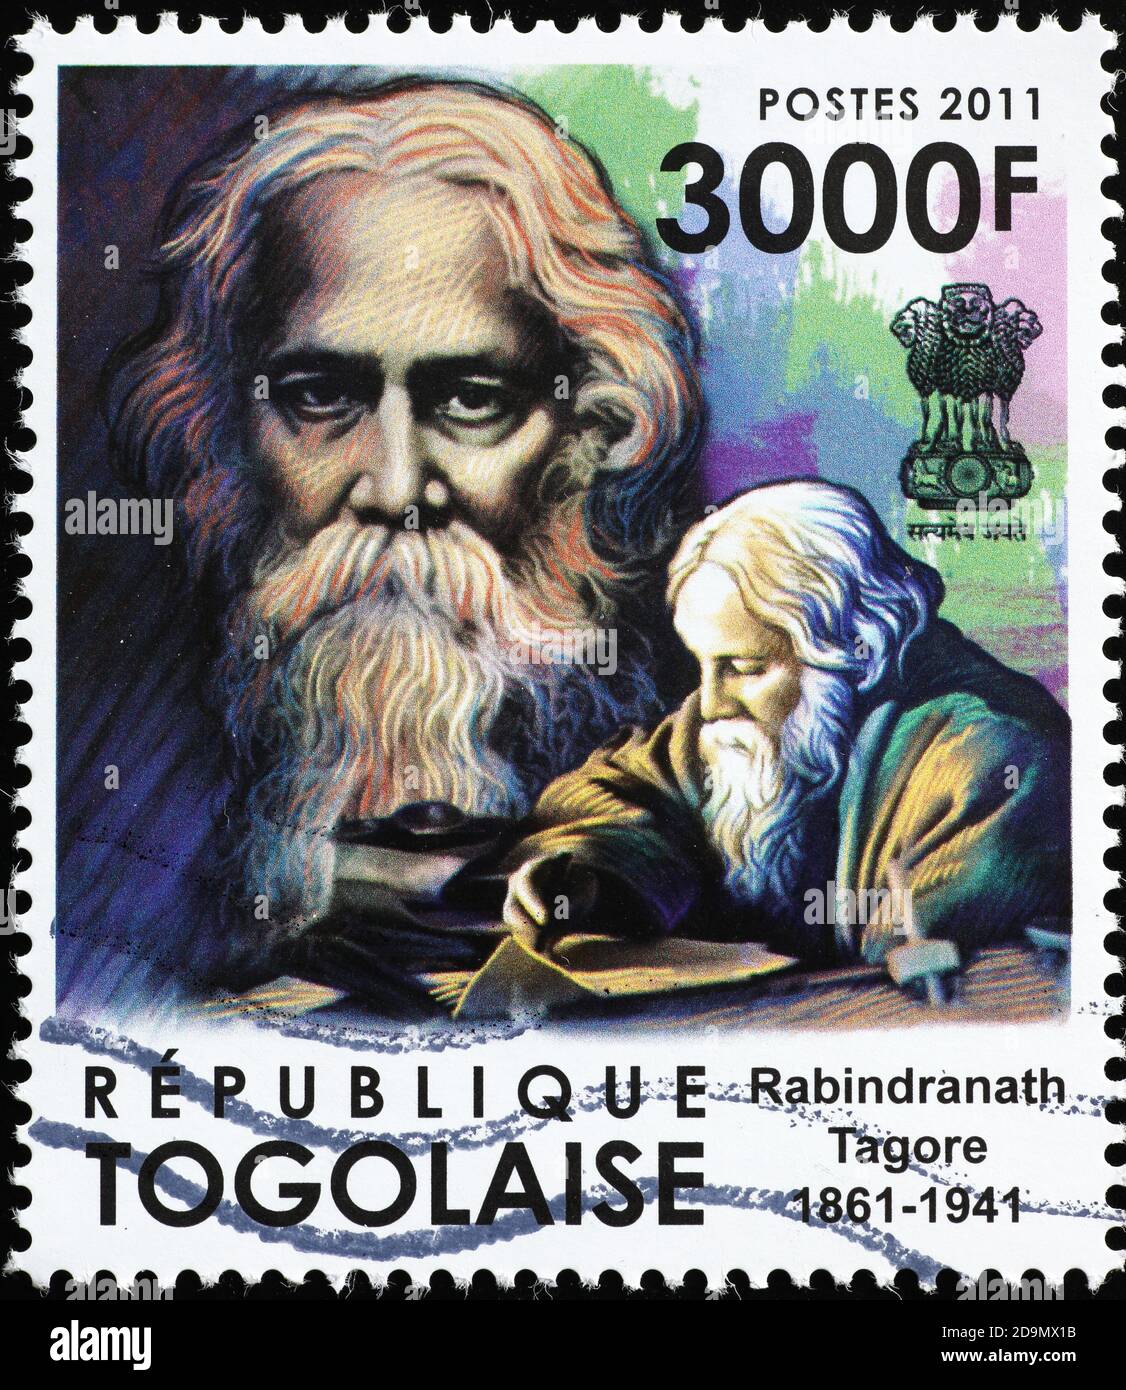 Rabindranath Tagore on postage stamp of Togo Stock Photo